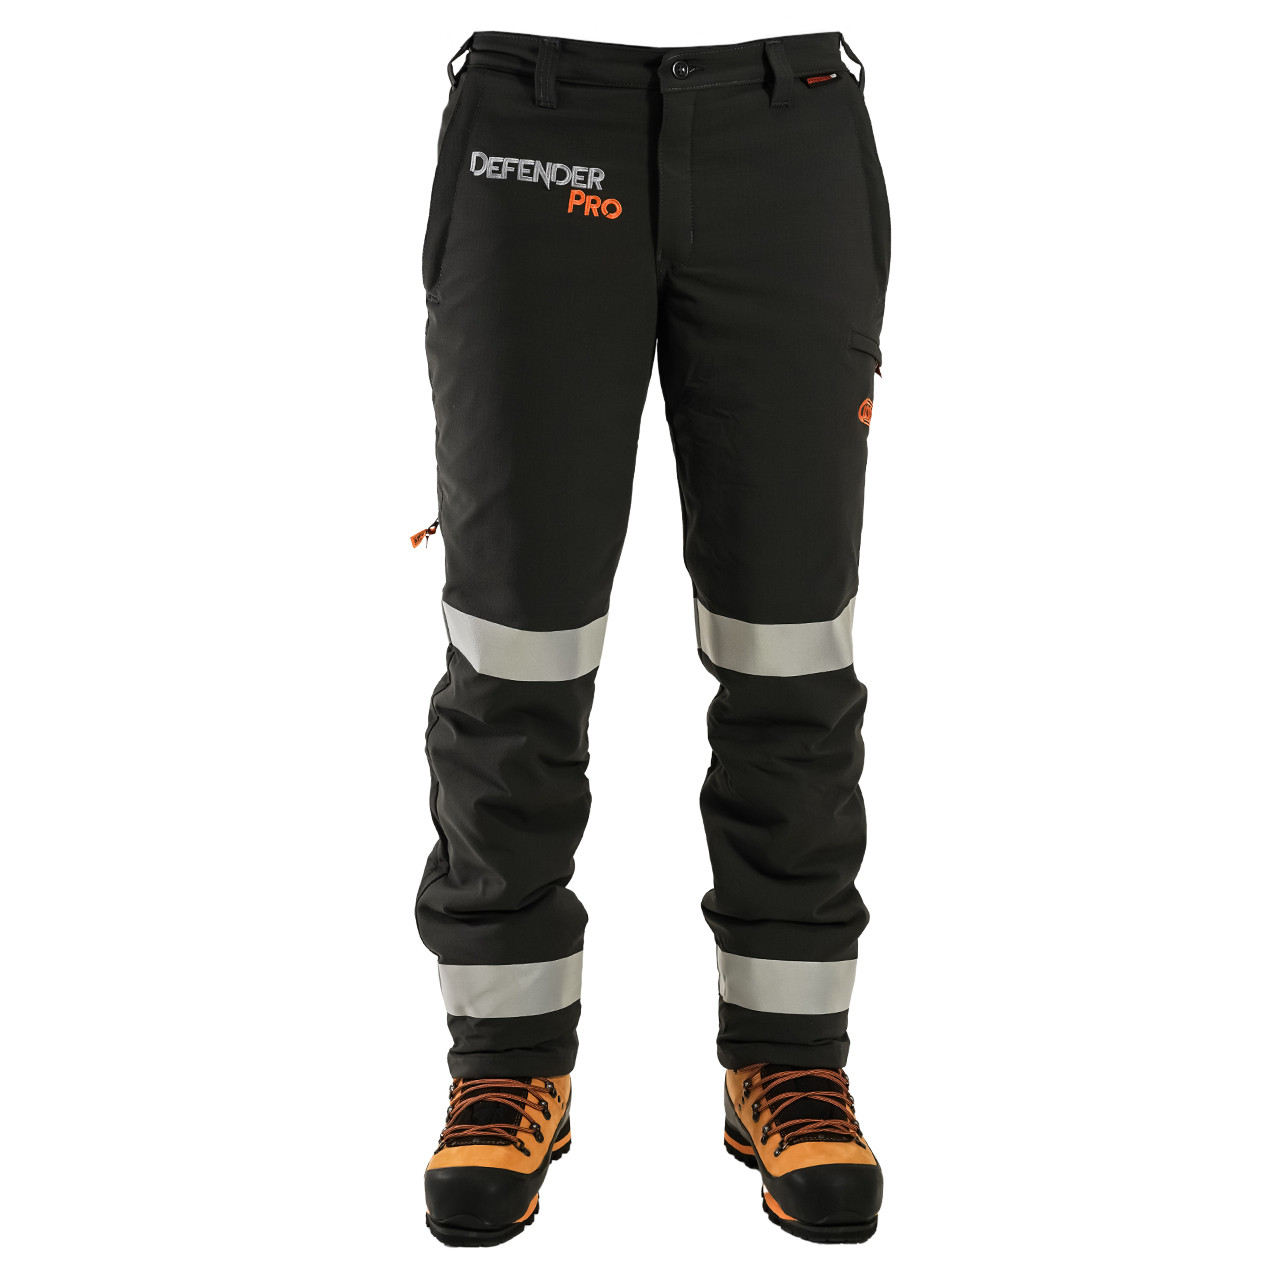 Scruffs Pro Base Layer Bottoms - All Clothing & Protection